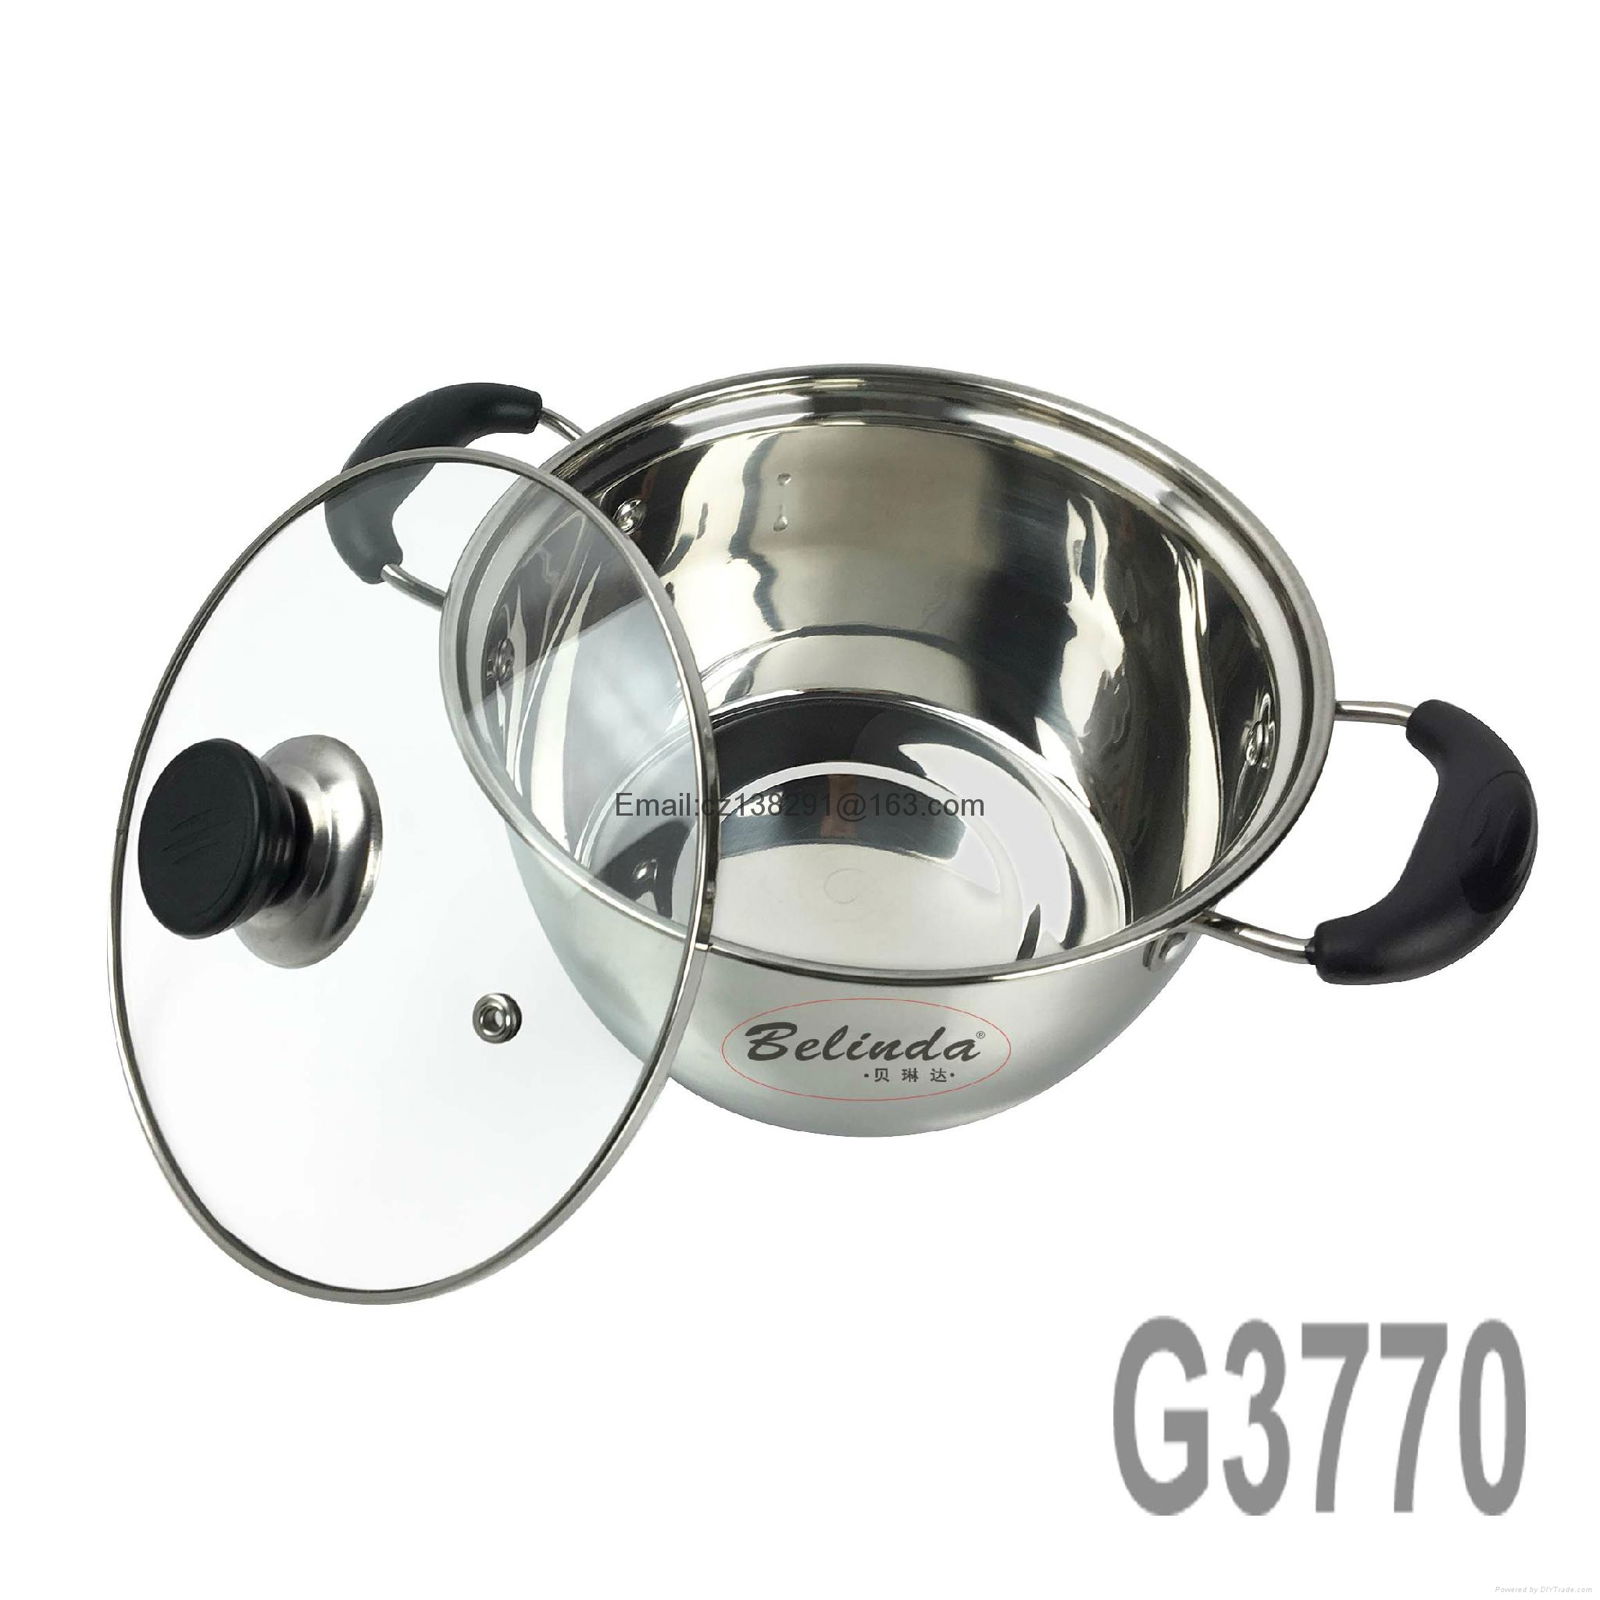 5pcs Stainless Steel Cookware Pot Set with Glass Lids 4